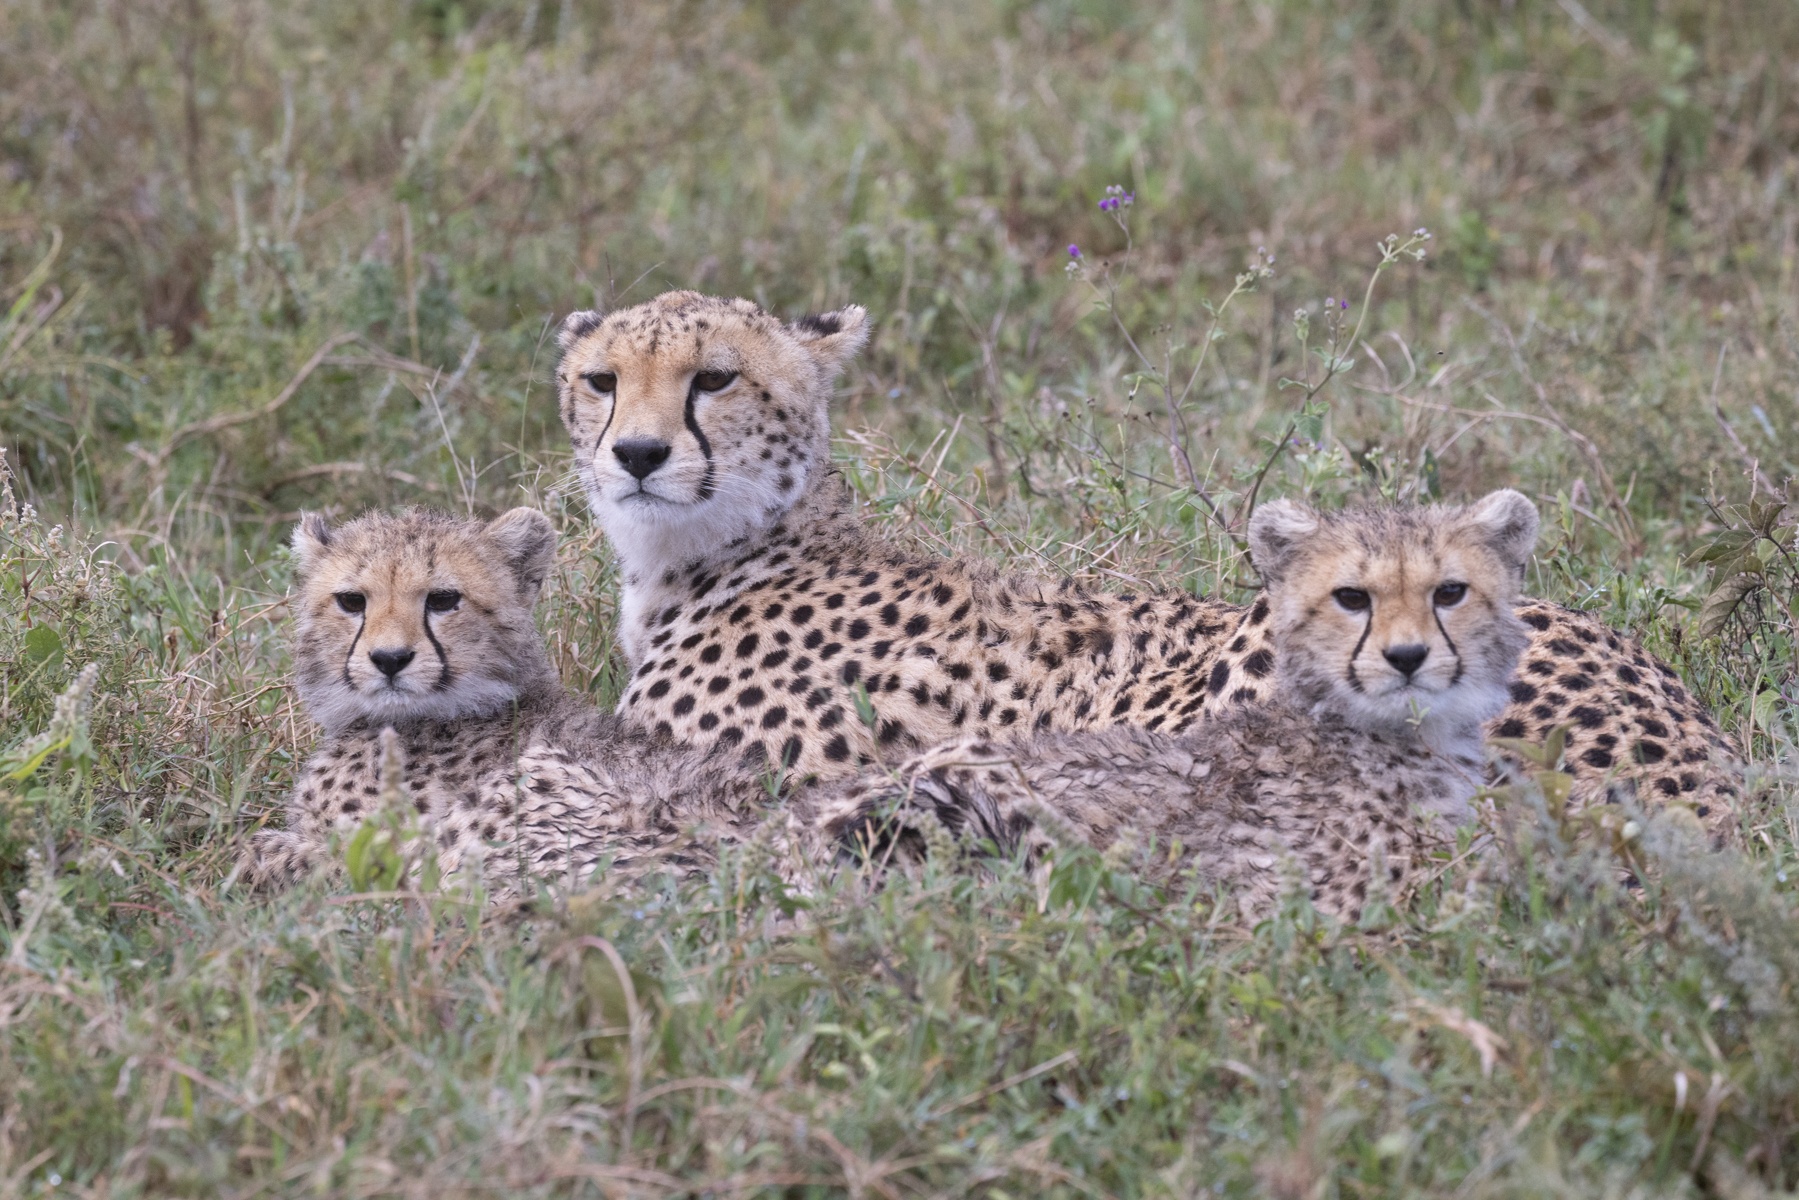 Cheetah families are always wonderful photography subjects and so hard to depart from on a safari!